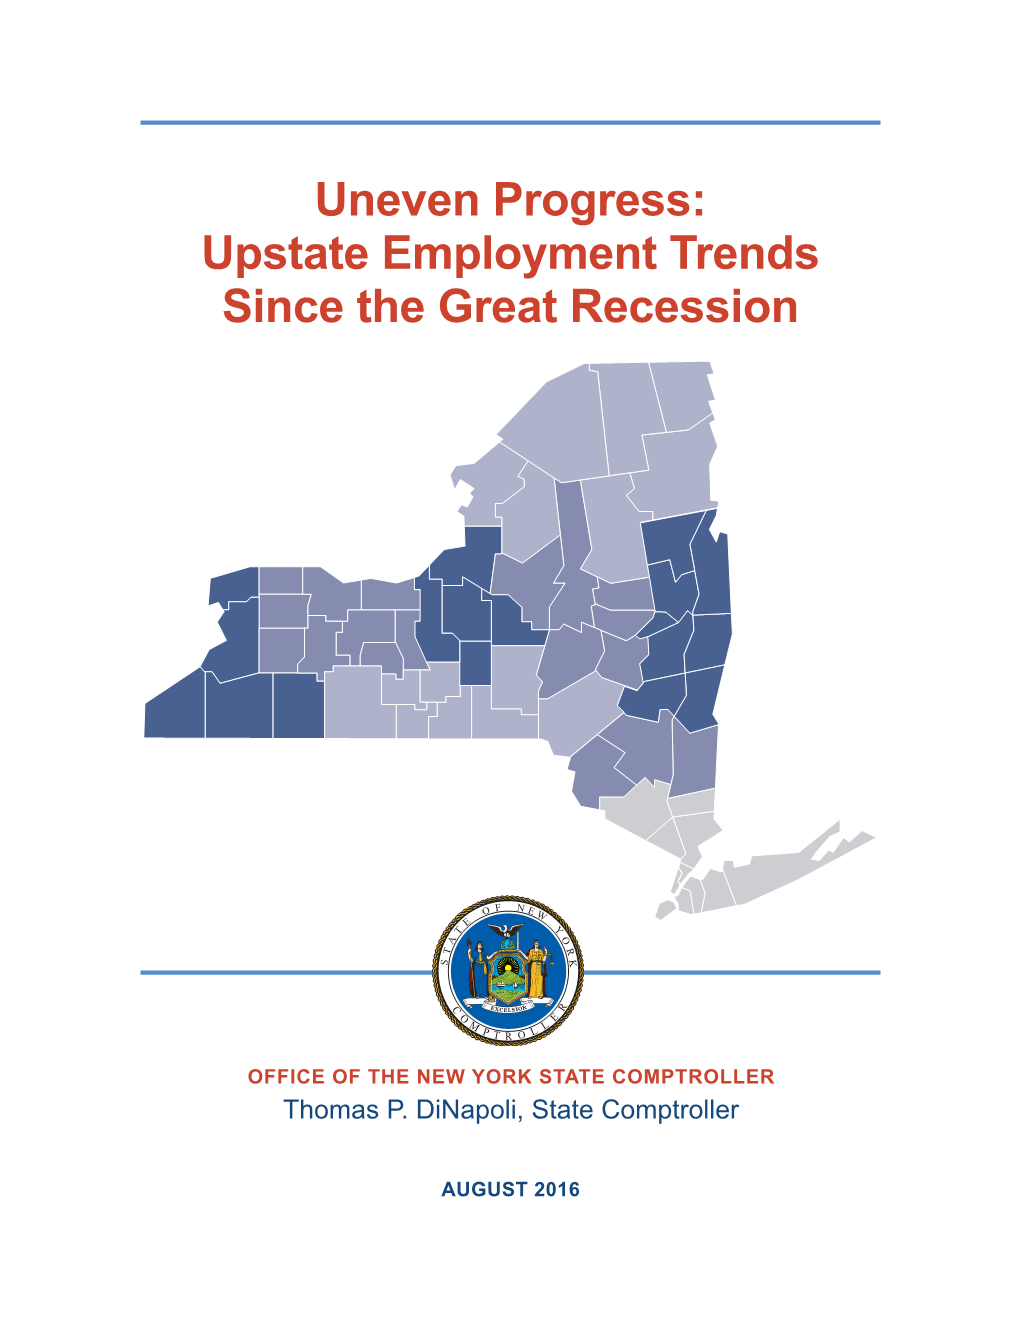 Upstate Employment Trends Since the Great Recession, August 2016